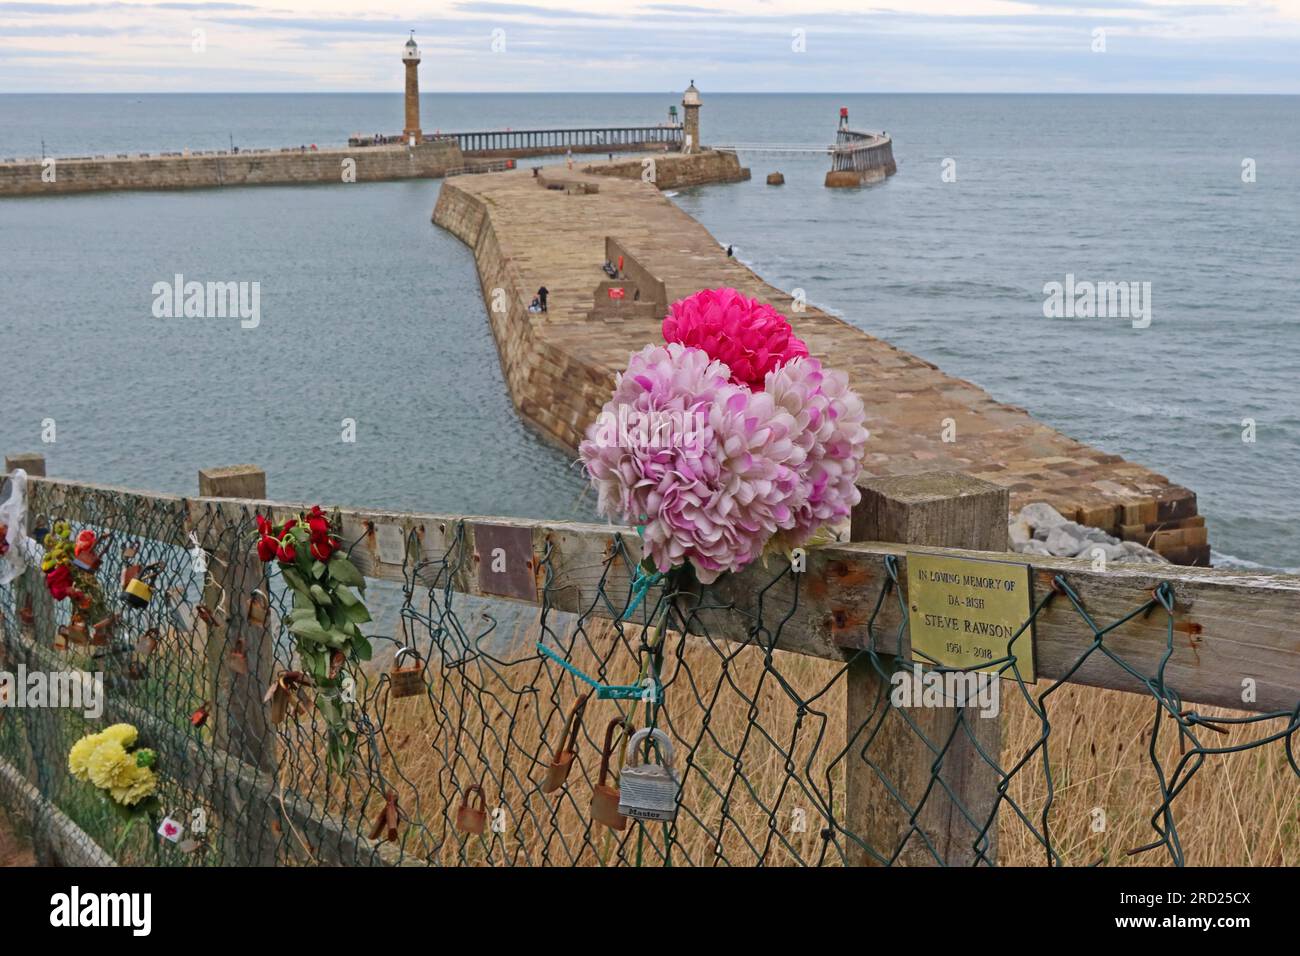 From the Haggerlythe, Whitby pier & harbour, memorials, lovelocks and flowers, in North Yorkshire, England, UK, YO22 4DW Stock Photo